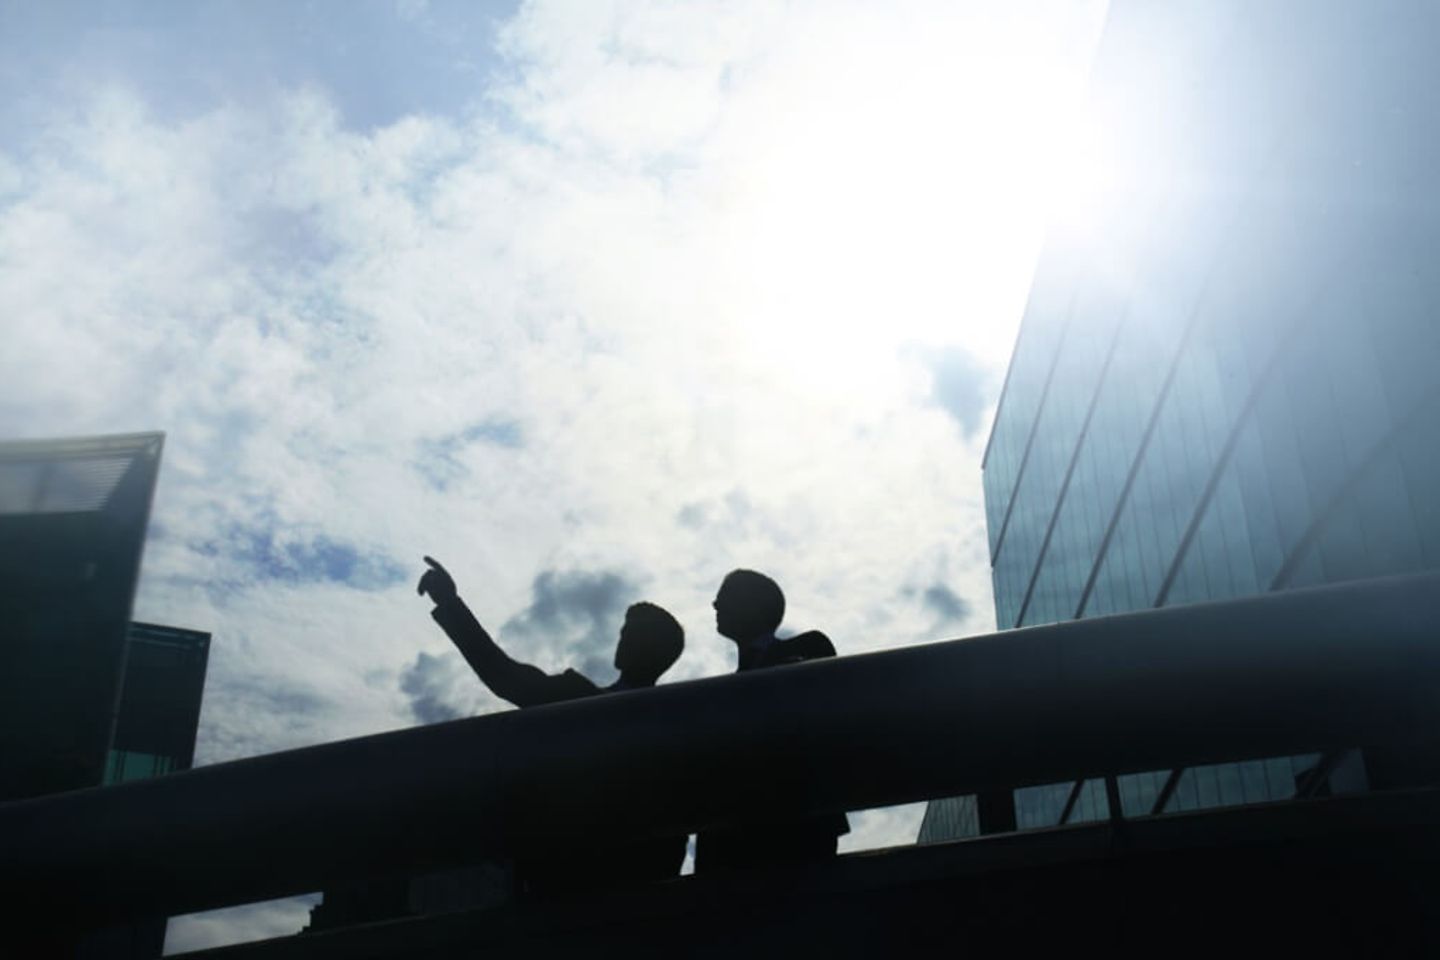 Two people are standing on the balcony of an office building.